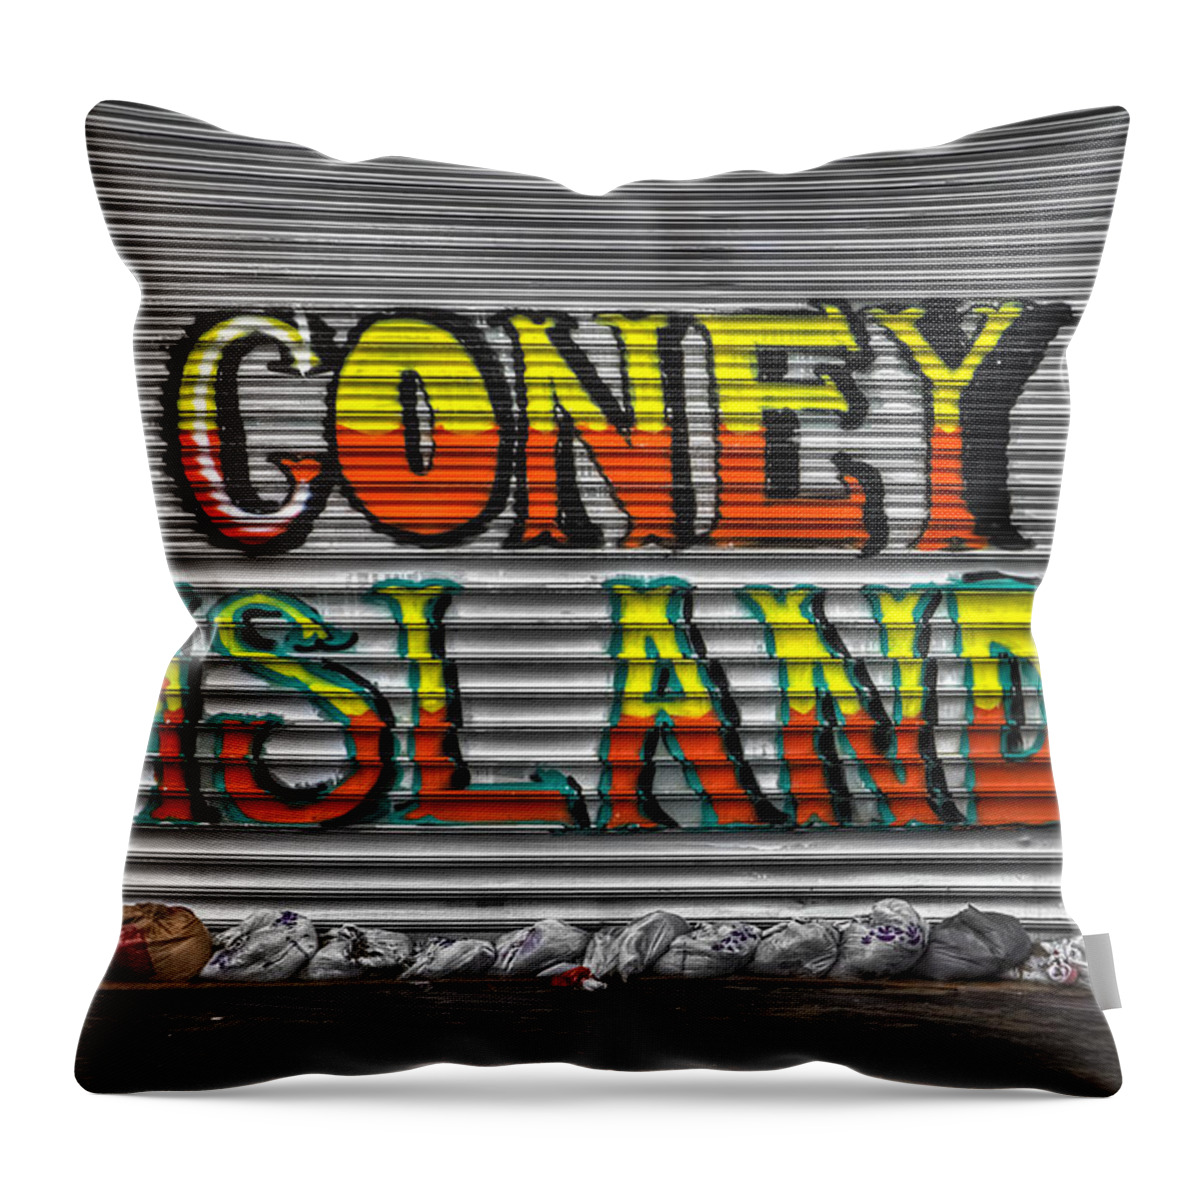 Coney Island Throw Pillow featuring the photograph Unsinkable by Evelina Kremsdorf